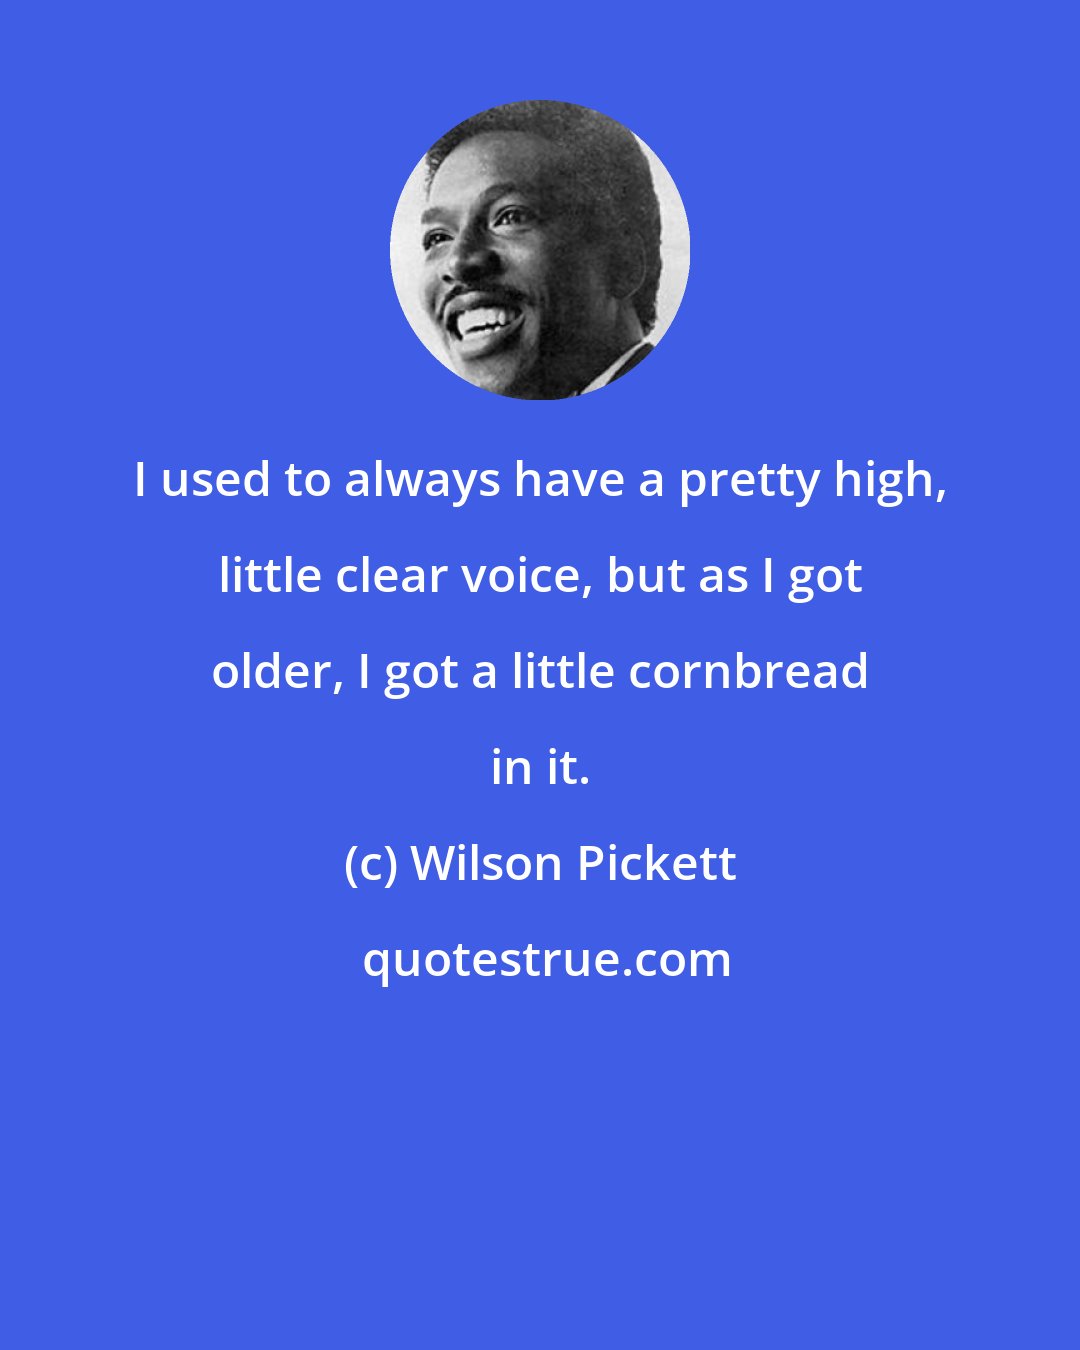 Wilson Pickett: I used to always have a pretty high, little clear voice, but as I got older, I got a little cornbread in it.